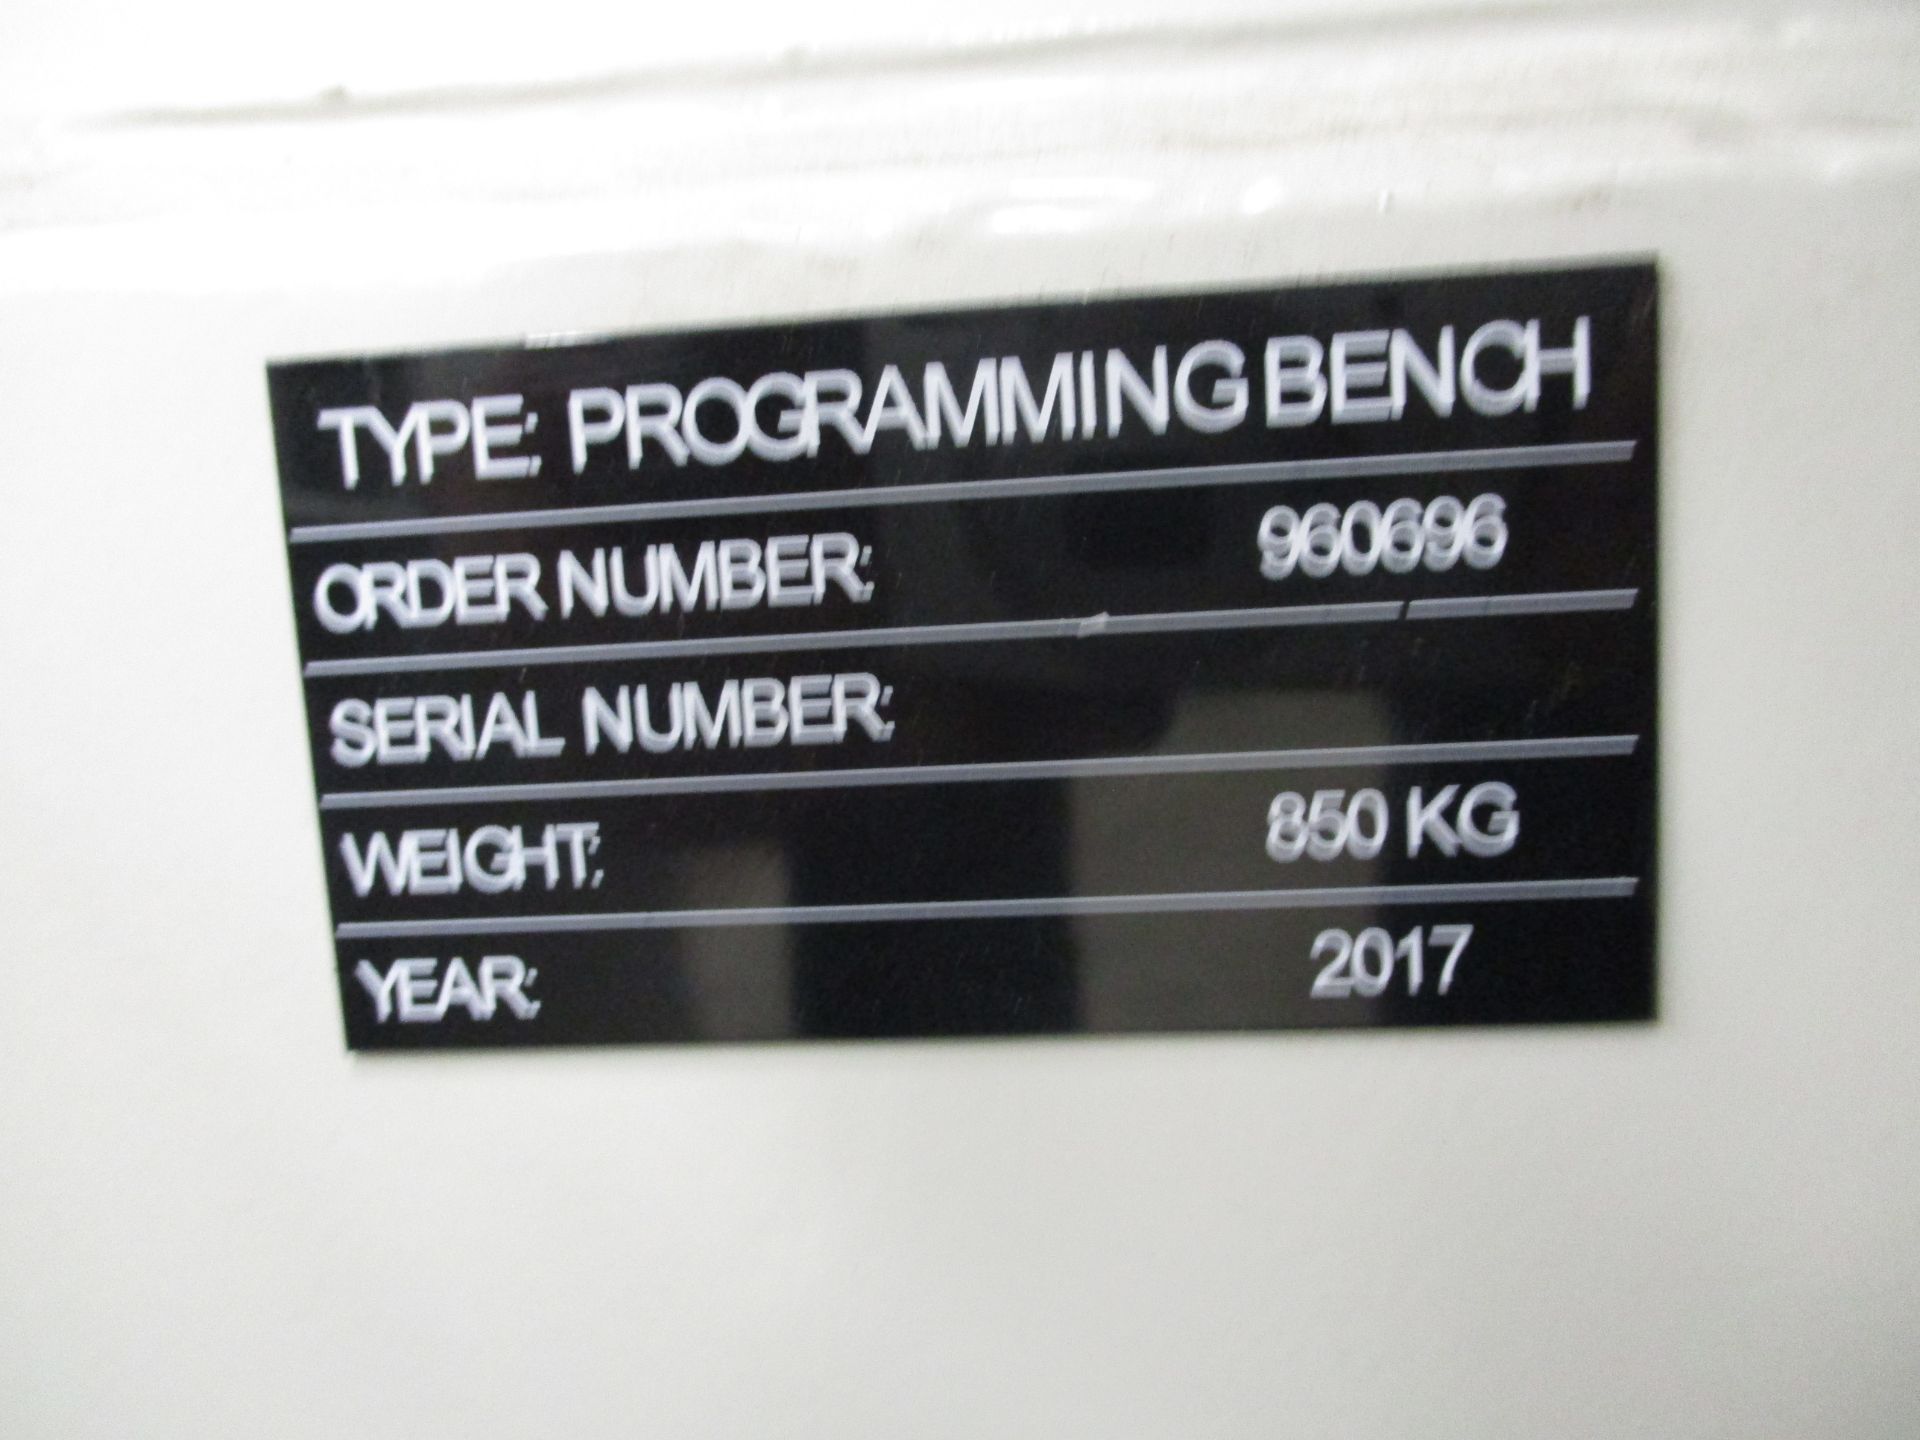 Maus Grinding Machine Programming Bench, Note: Machine Frame Only - Image 6 of 6